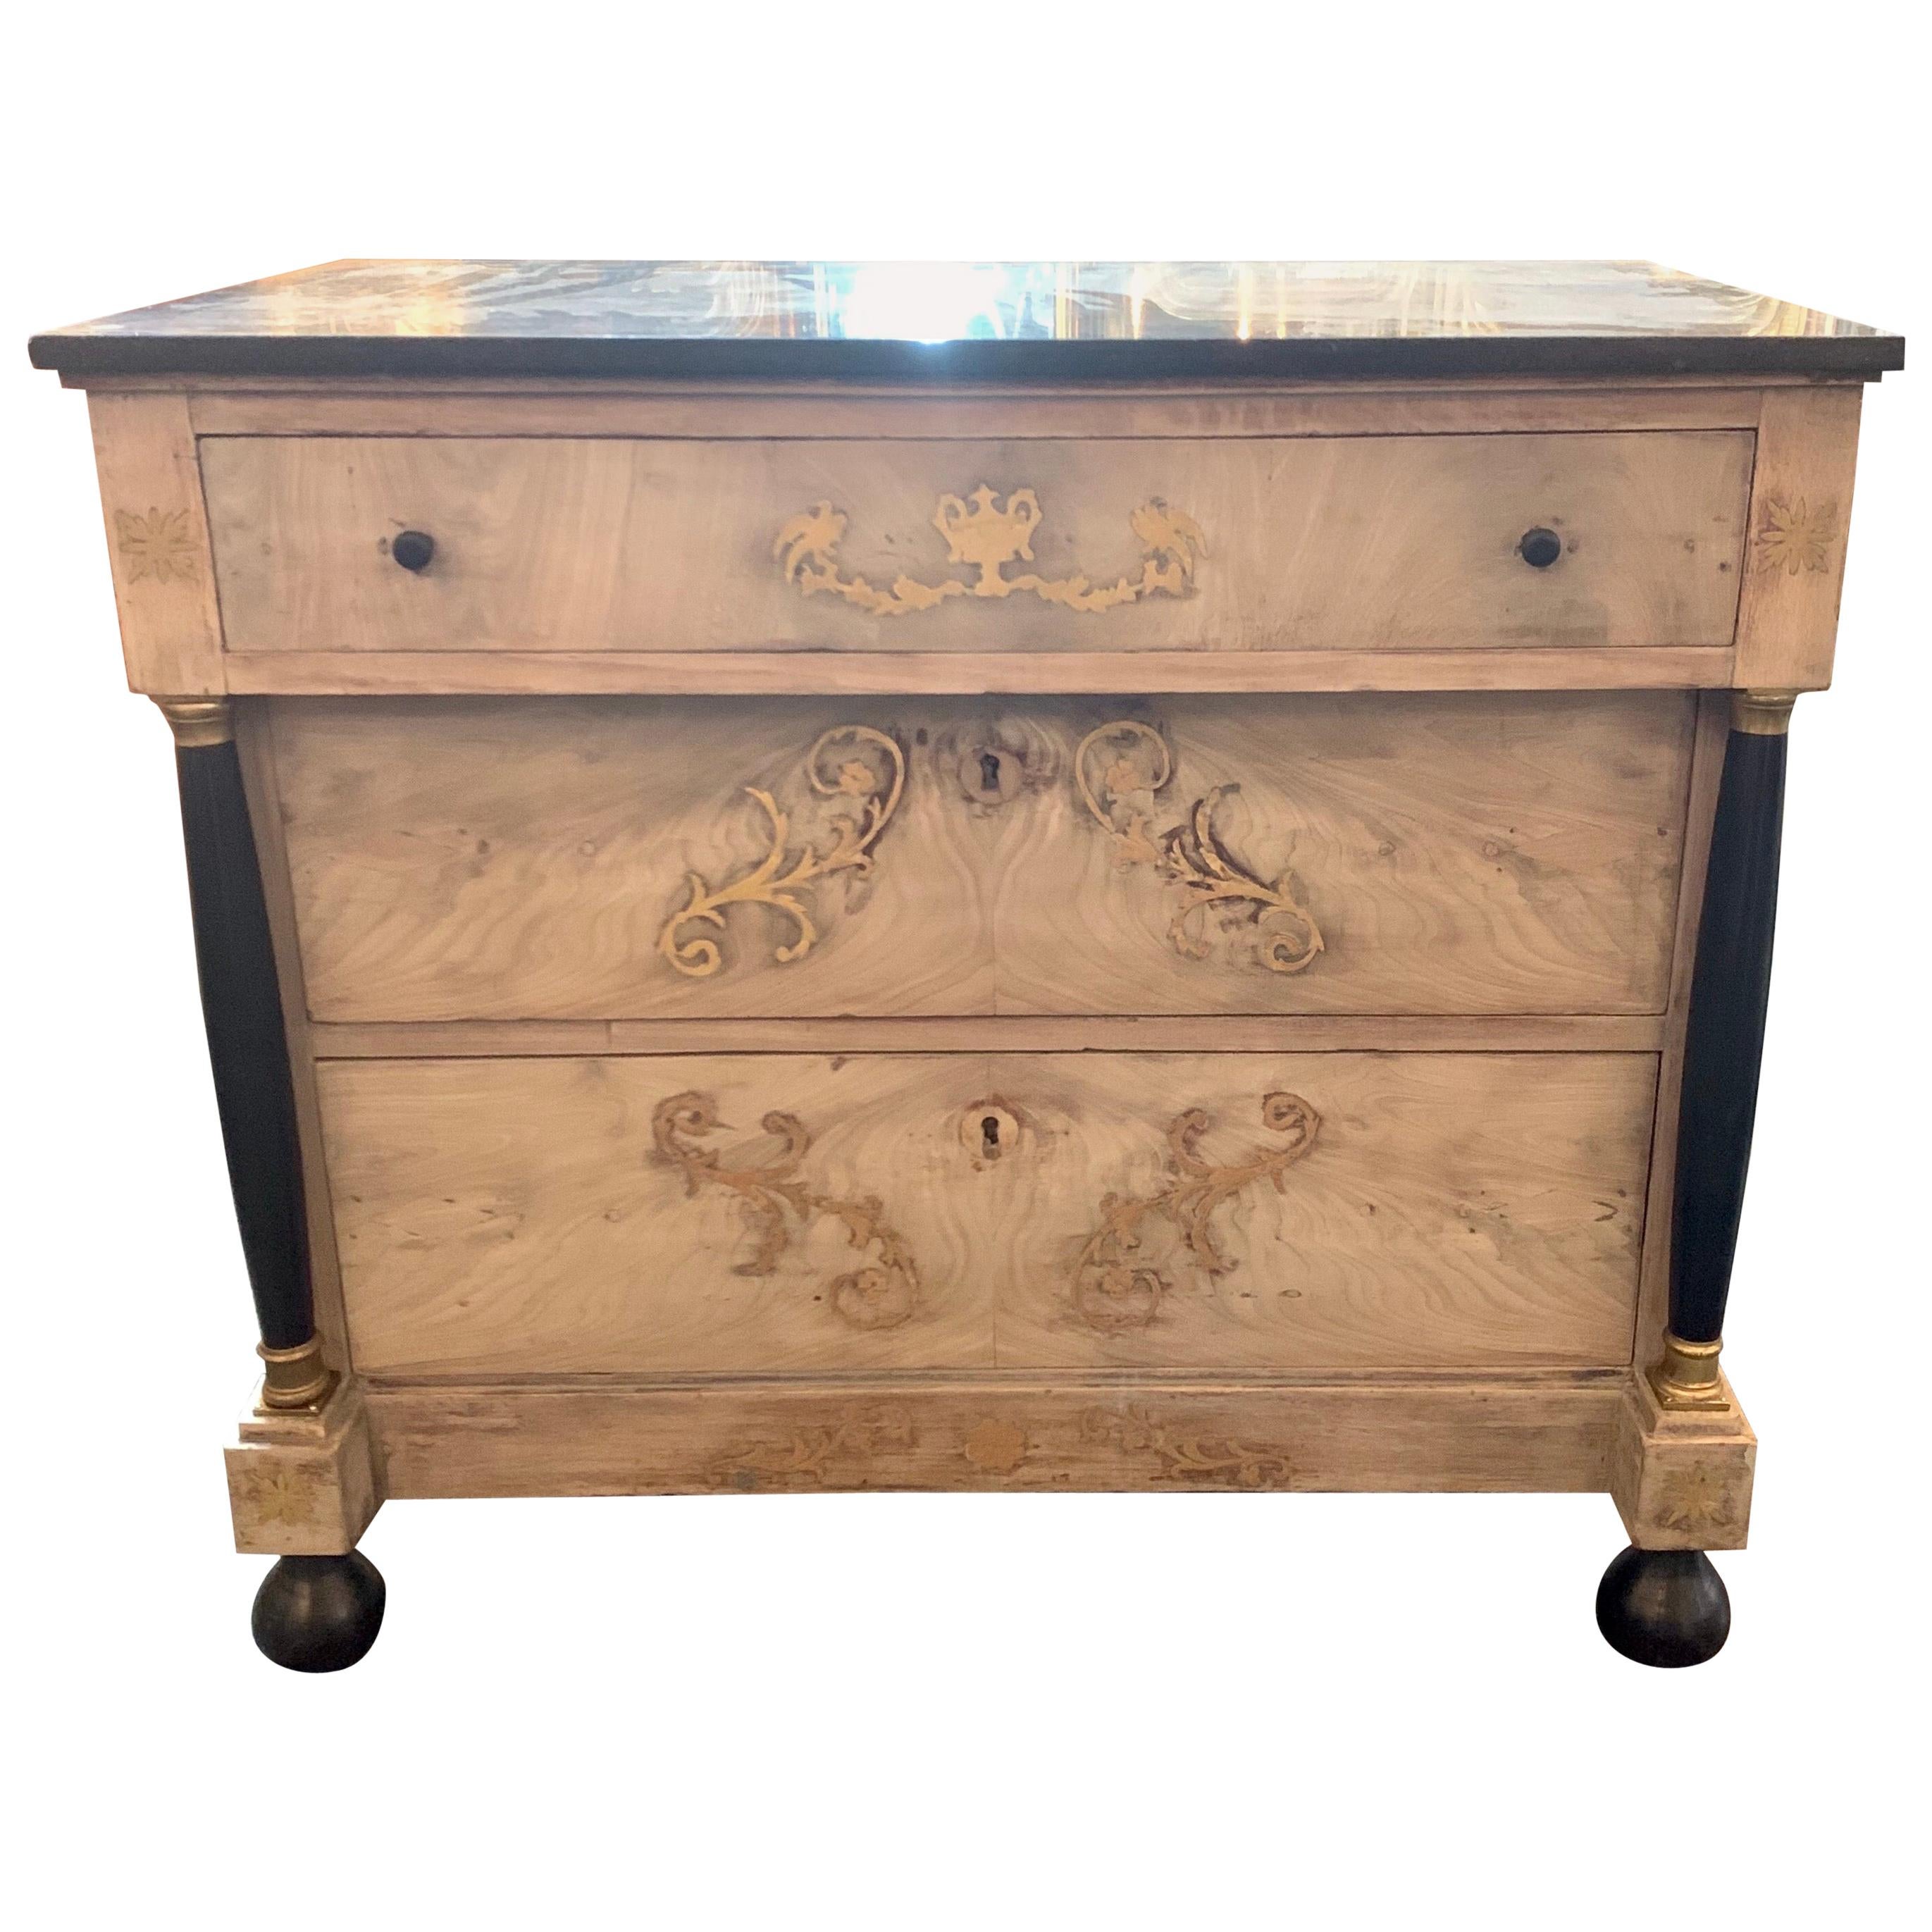 19th Century French Empire Bleached Mahogany Chest with Brass Inlay